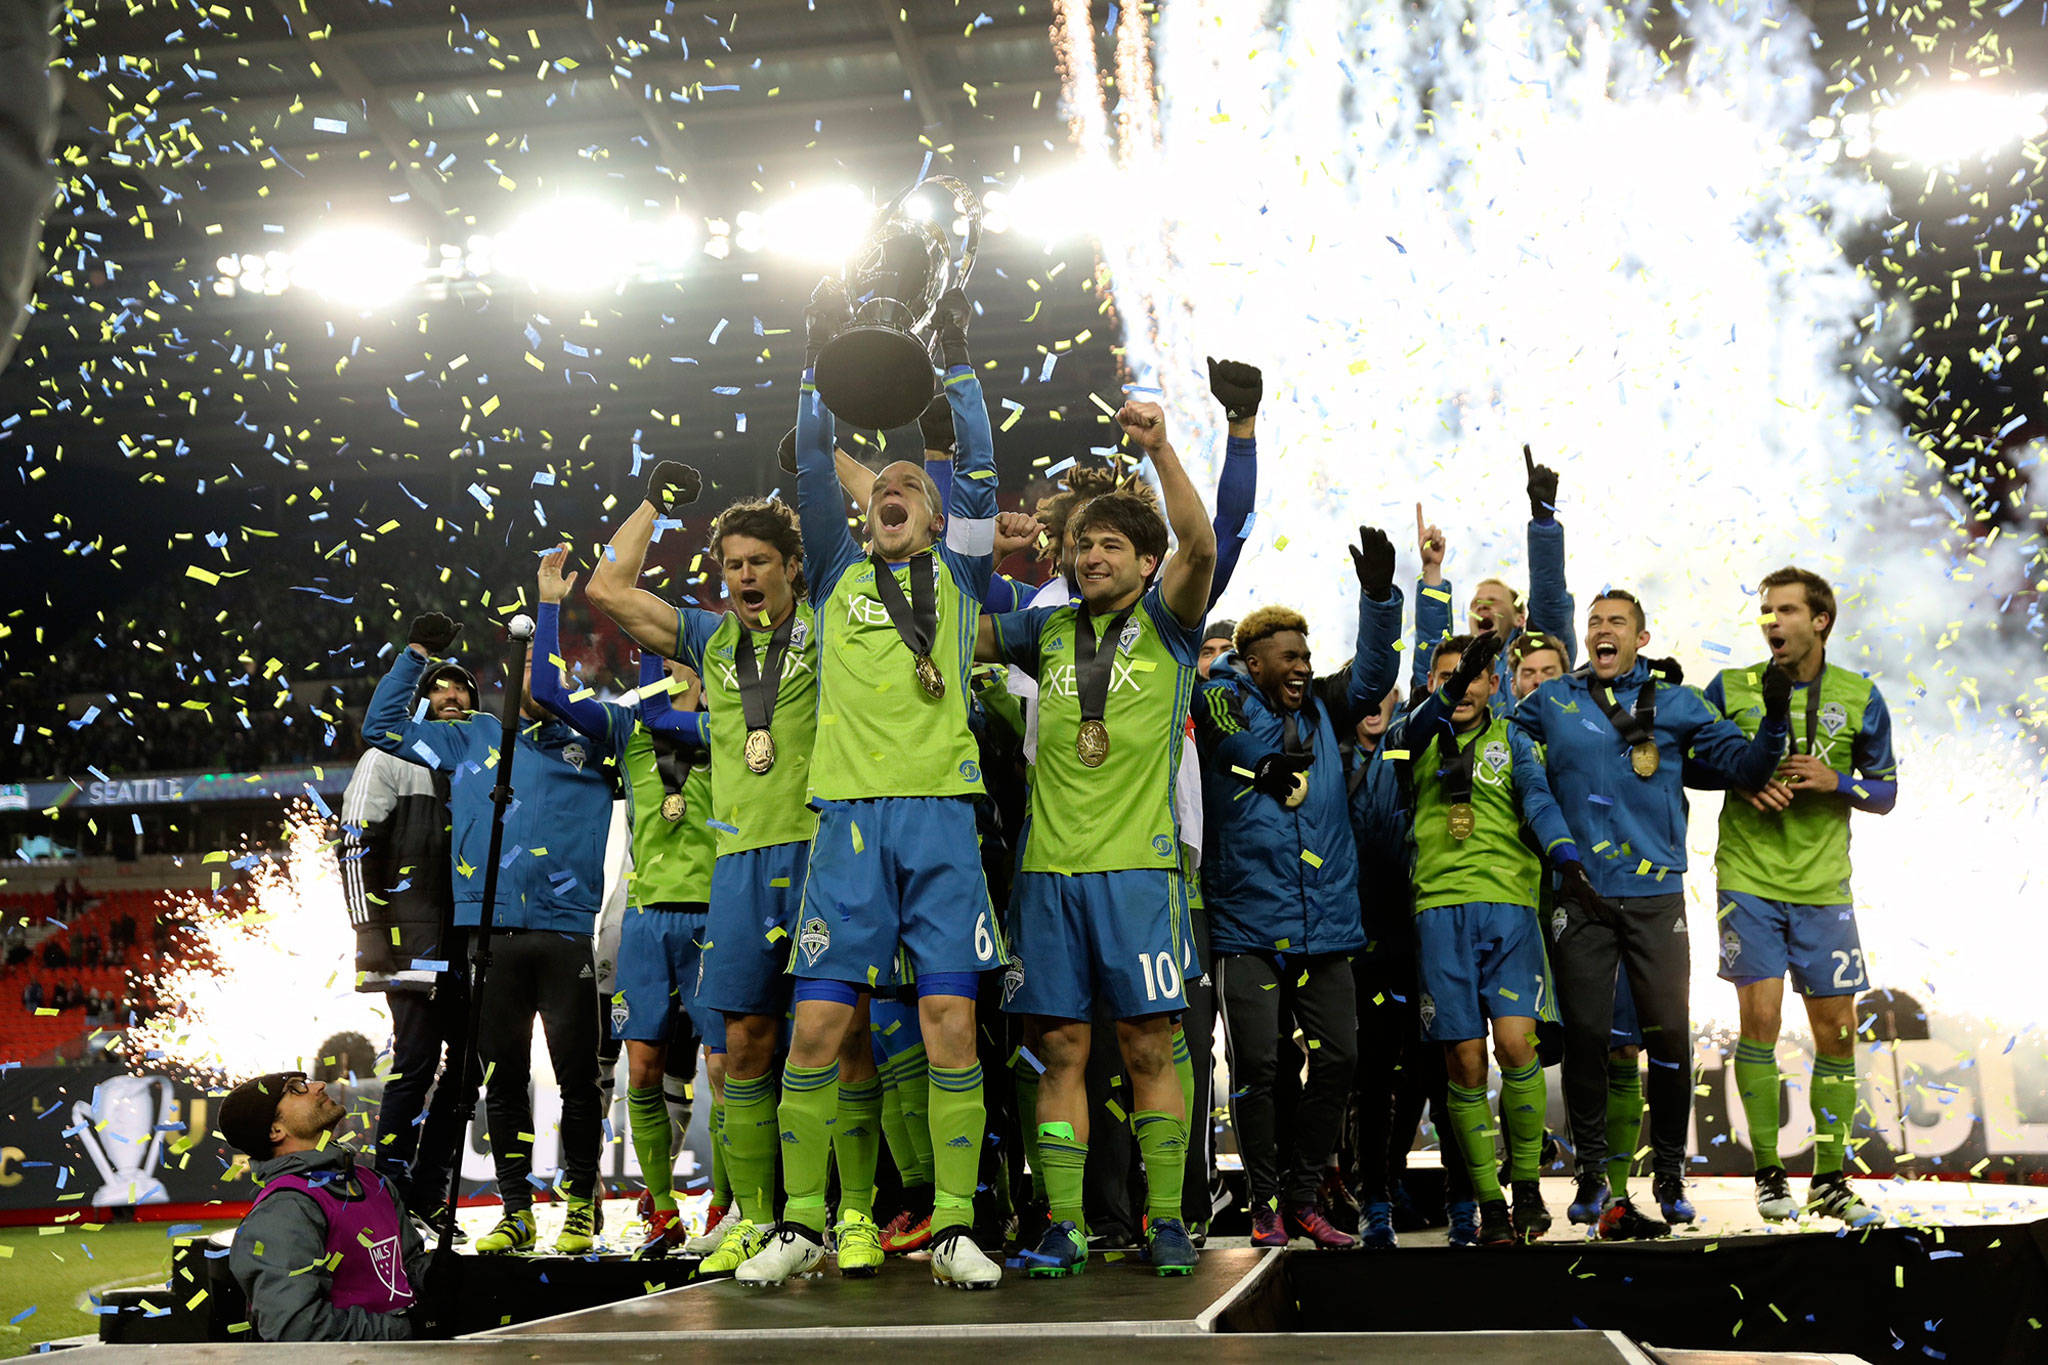 (Dan Poss | Seattle Sounders FC Communications) The Seattle Sounders FC squad celebrates winning the 2016 MLS Cup in Toronto after knocking off Toronto FC in a penalty kick shootout. Now, the Sounders will aim to repeat their trophy winning season, but will use the opening games to get healthy after a short offseason.